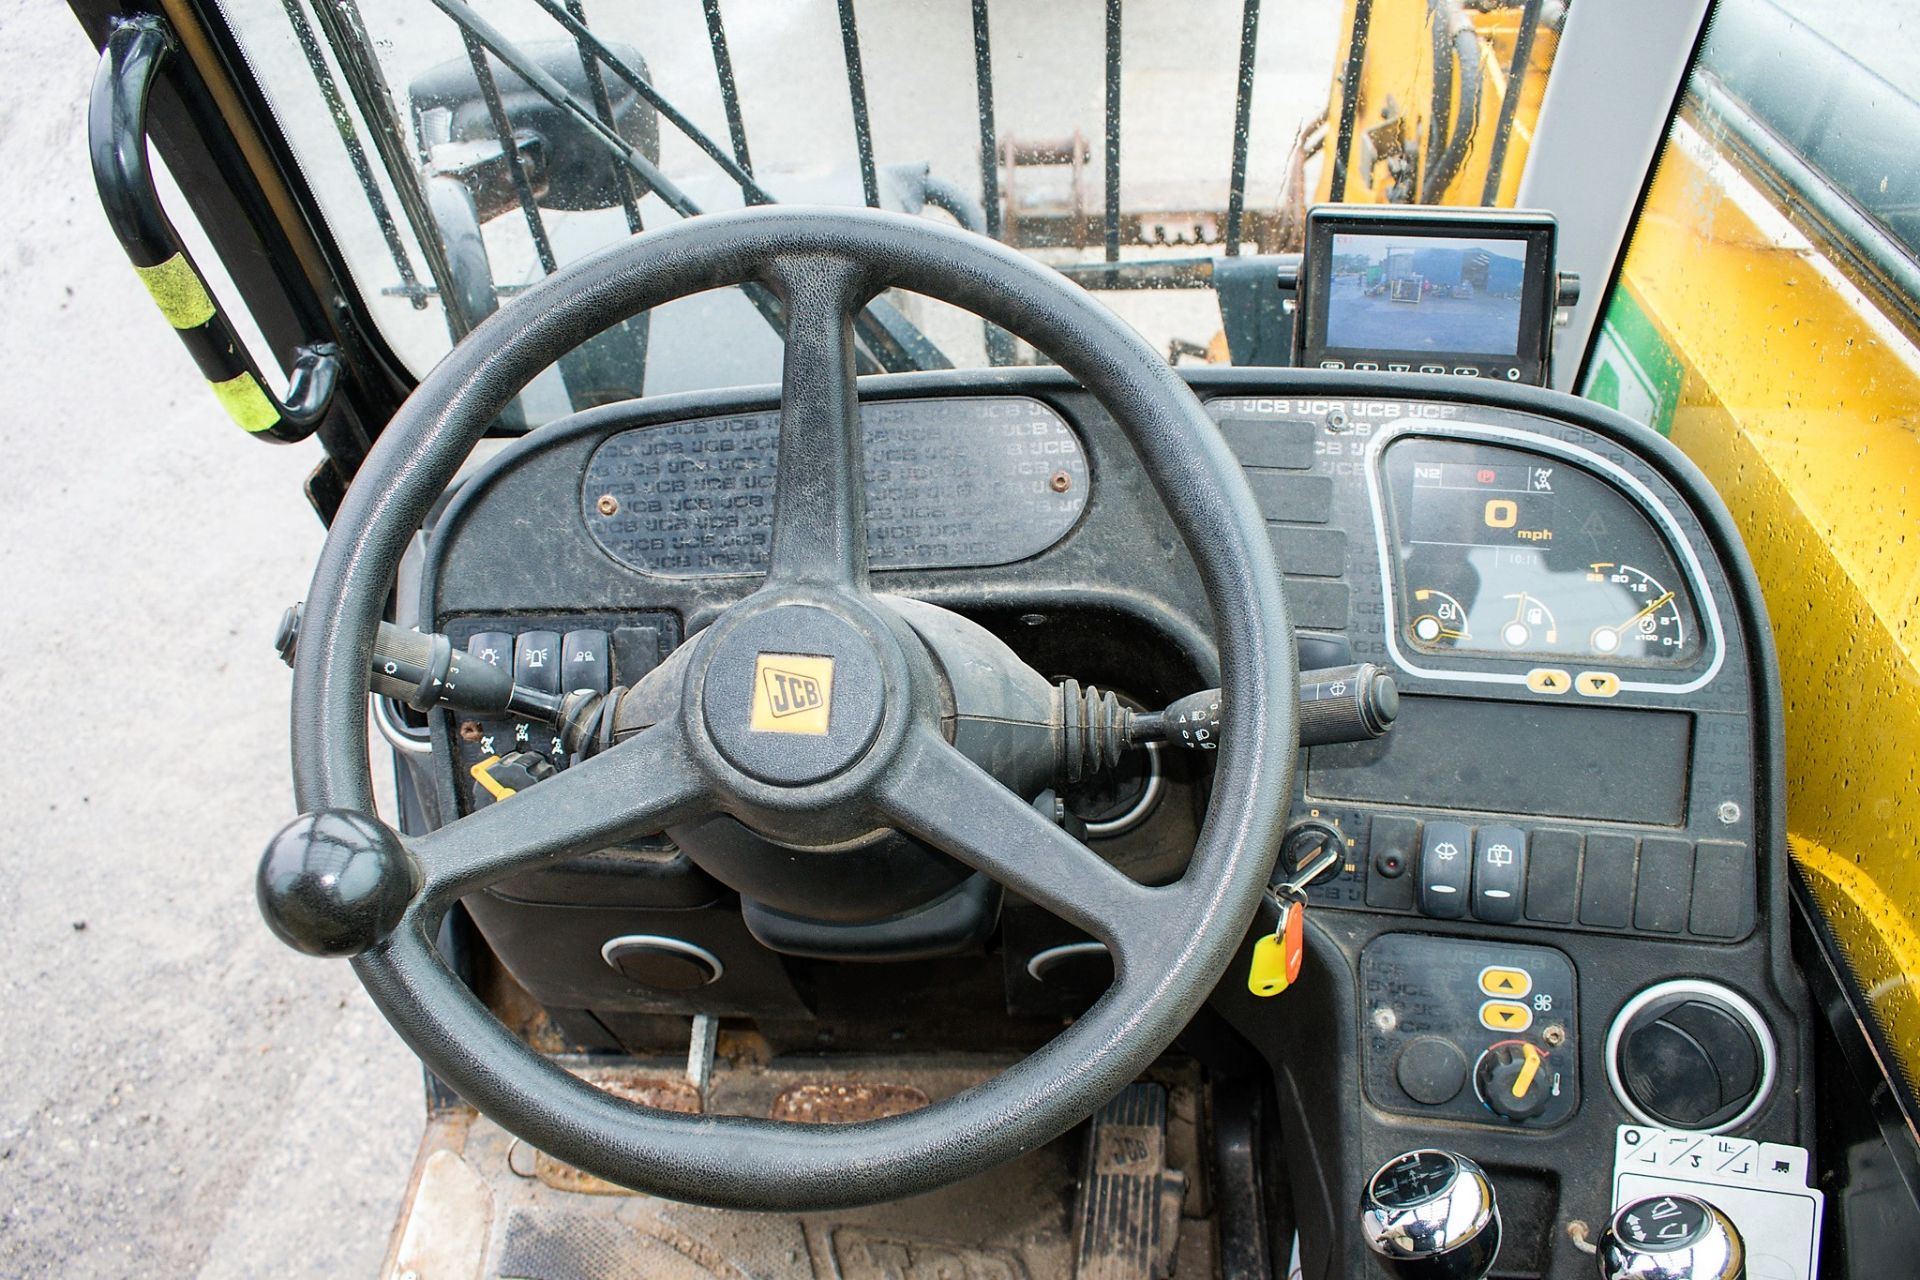 JCB 535-95 9.5 metre telescopic handler Year: 2013 S/N: 2180457 Recorded Hours: 1251 c/w rear camera - Image 13 of 13